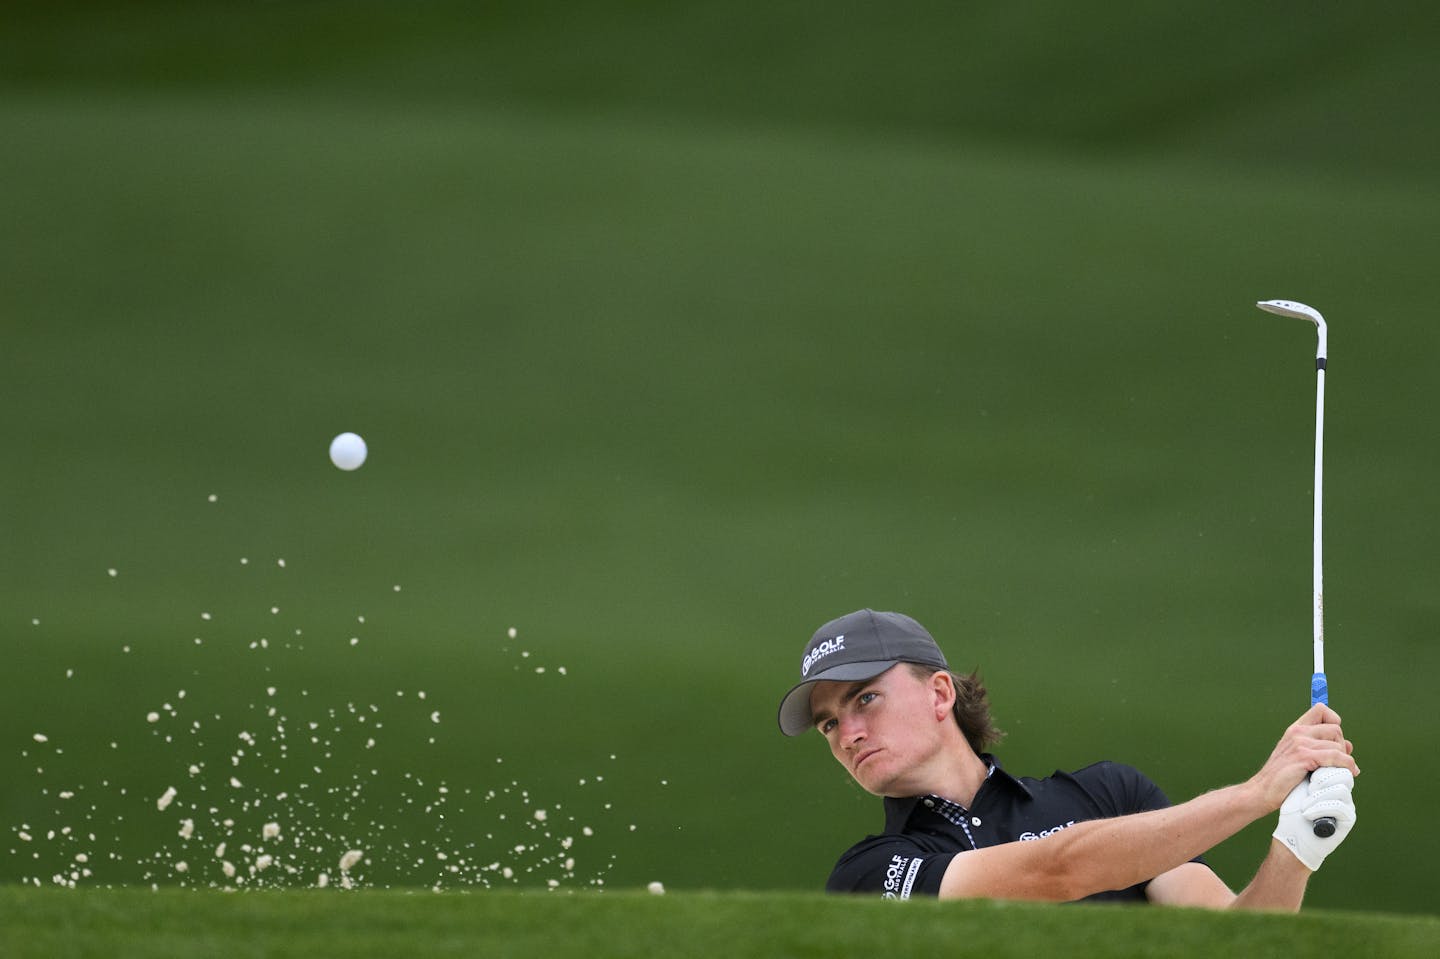 Jasper Stubbs of Australia plays a stroke from a bunker during practice round 2 prior to the start of the 2024 Masters Tournament